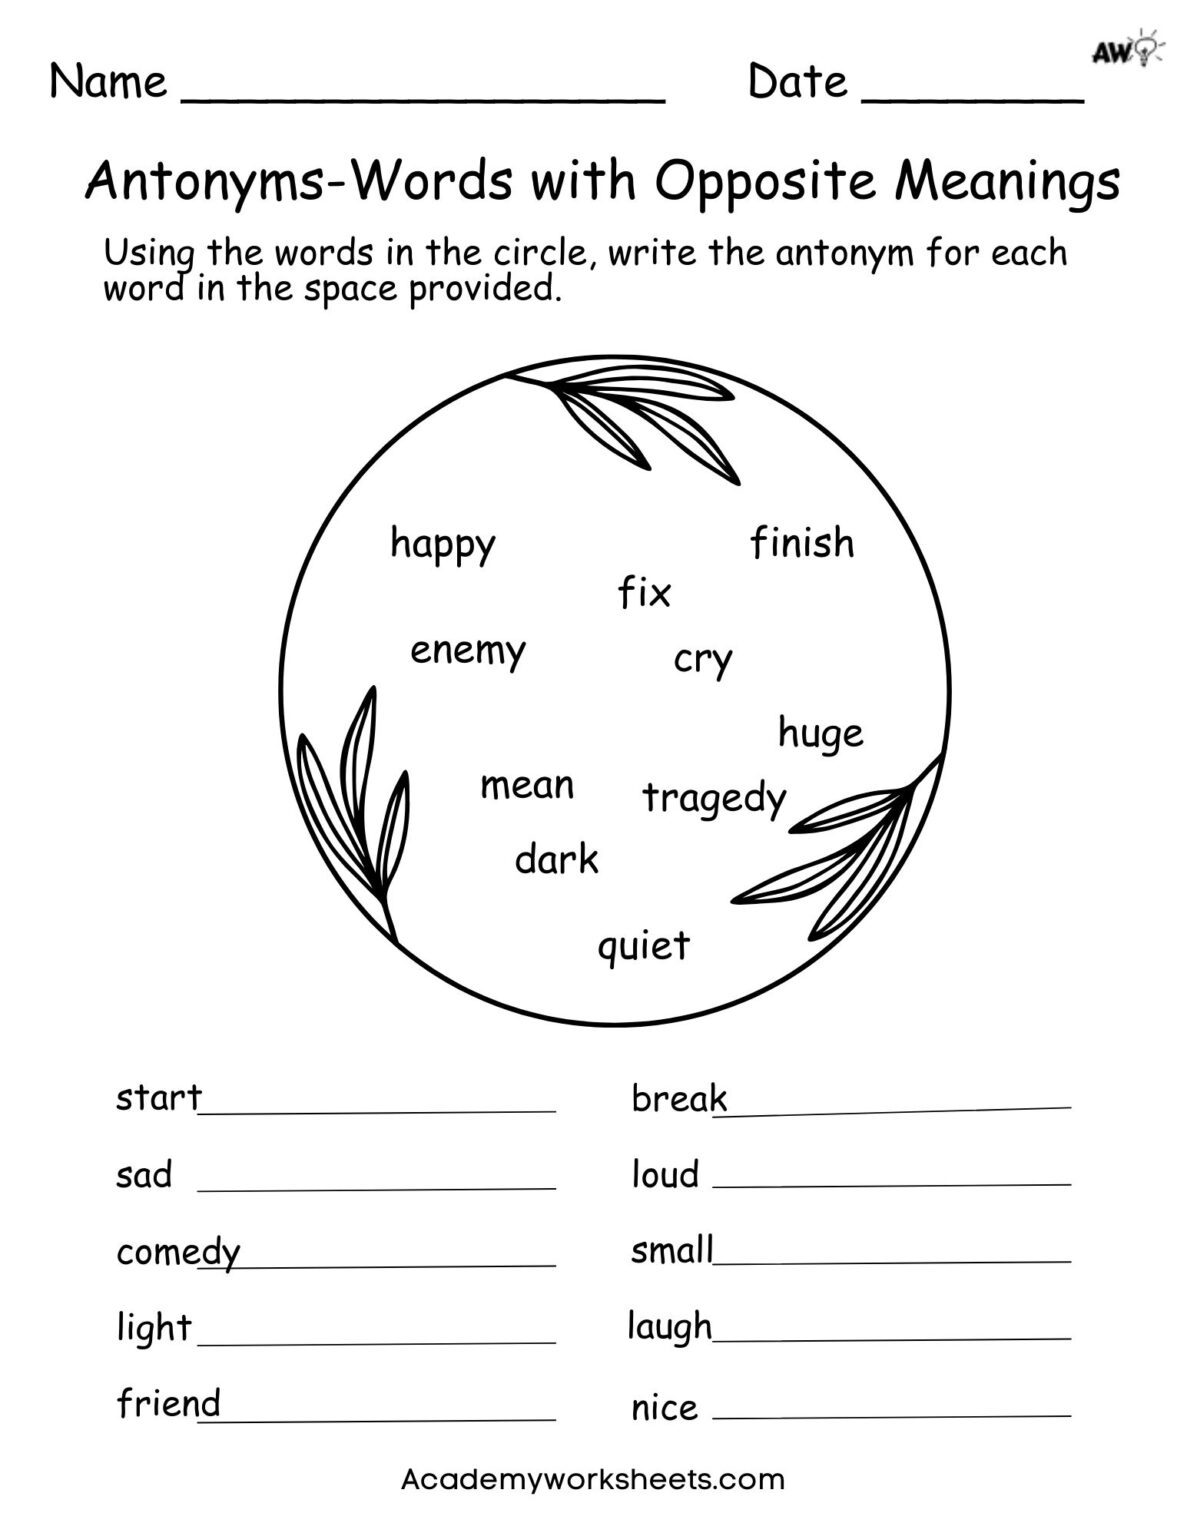 free sight word worksheets